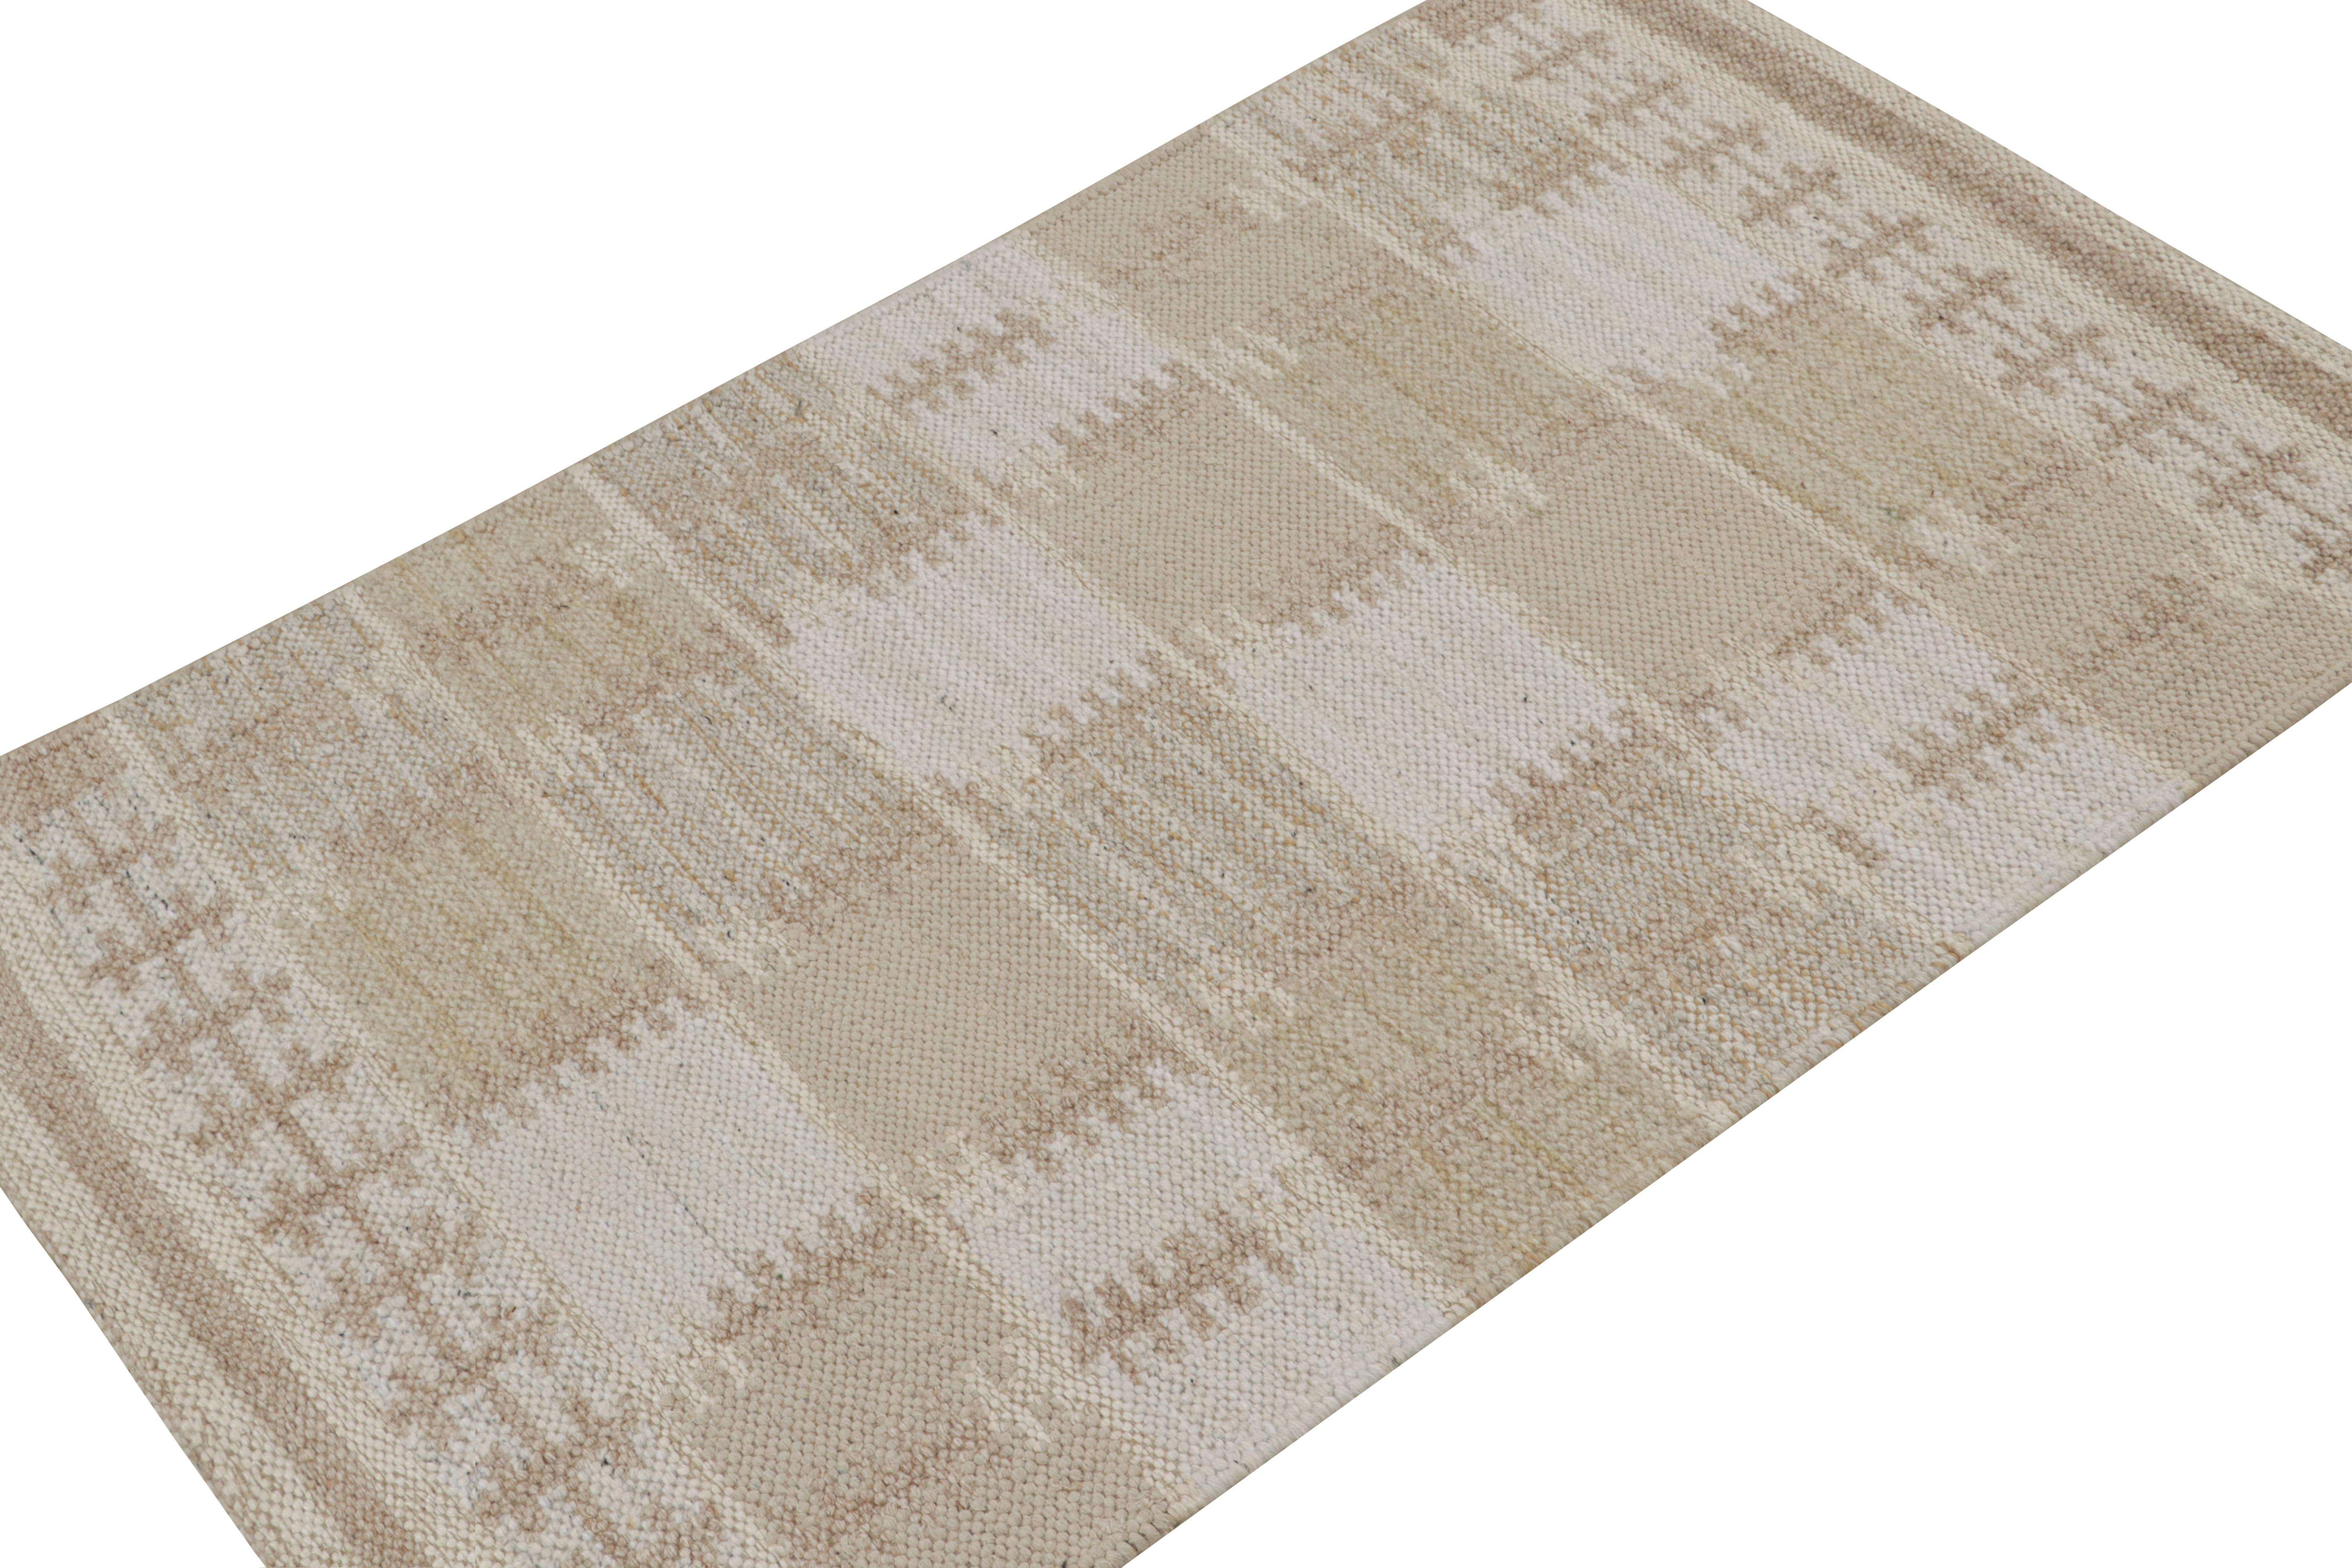 A smart 3x5 Swedish style kilim from our award-winning Scandinavian flat weave collection. Handwoven in wool & undyed natural yarn.

On the Design: 

This rug enjoys geometric patterns in comfortable brown & white. Keen eyes will admire undyed,